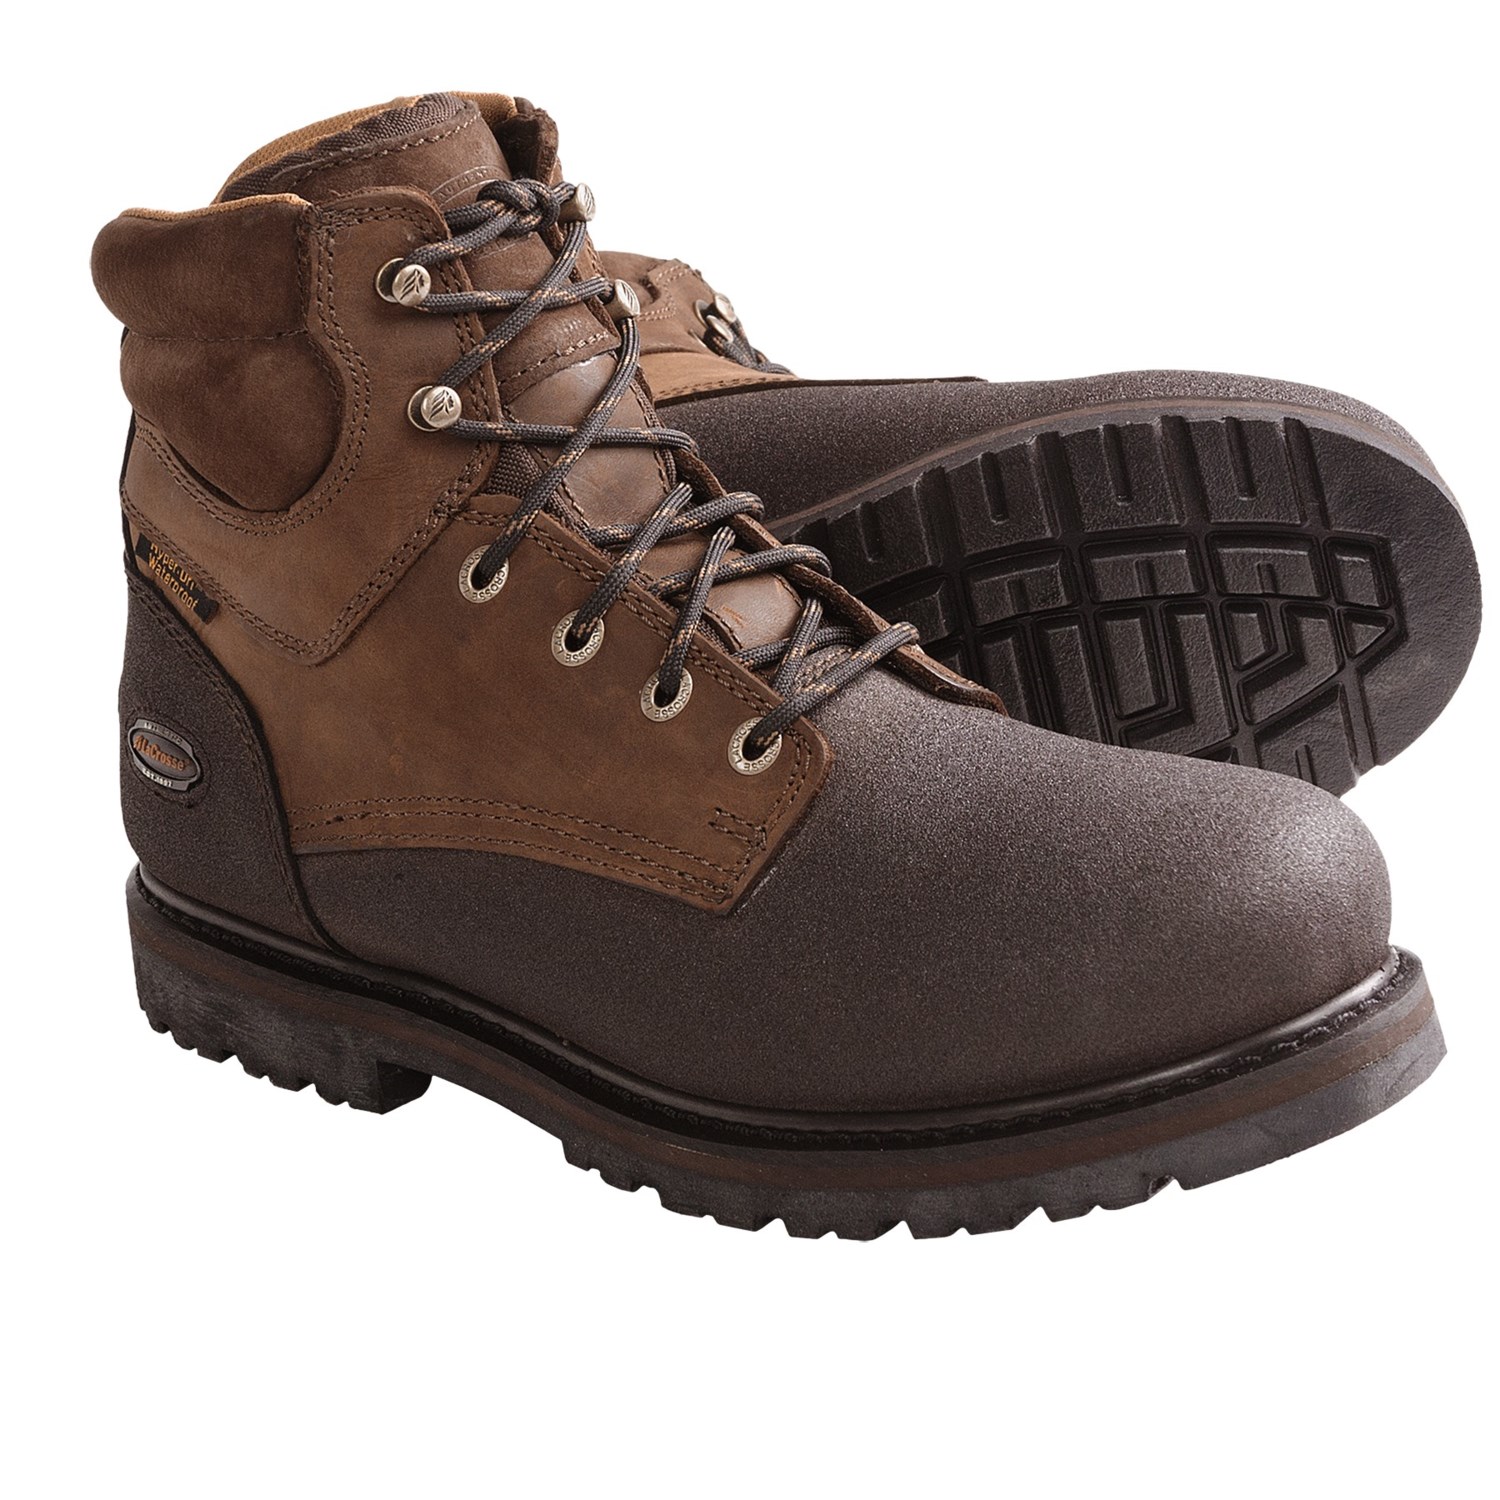 LaCrosse Extreme Tough Work Boots - Waterproof, 6” (For Men) in Brown